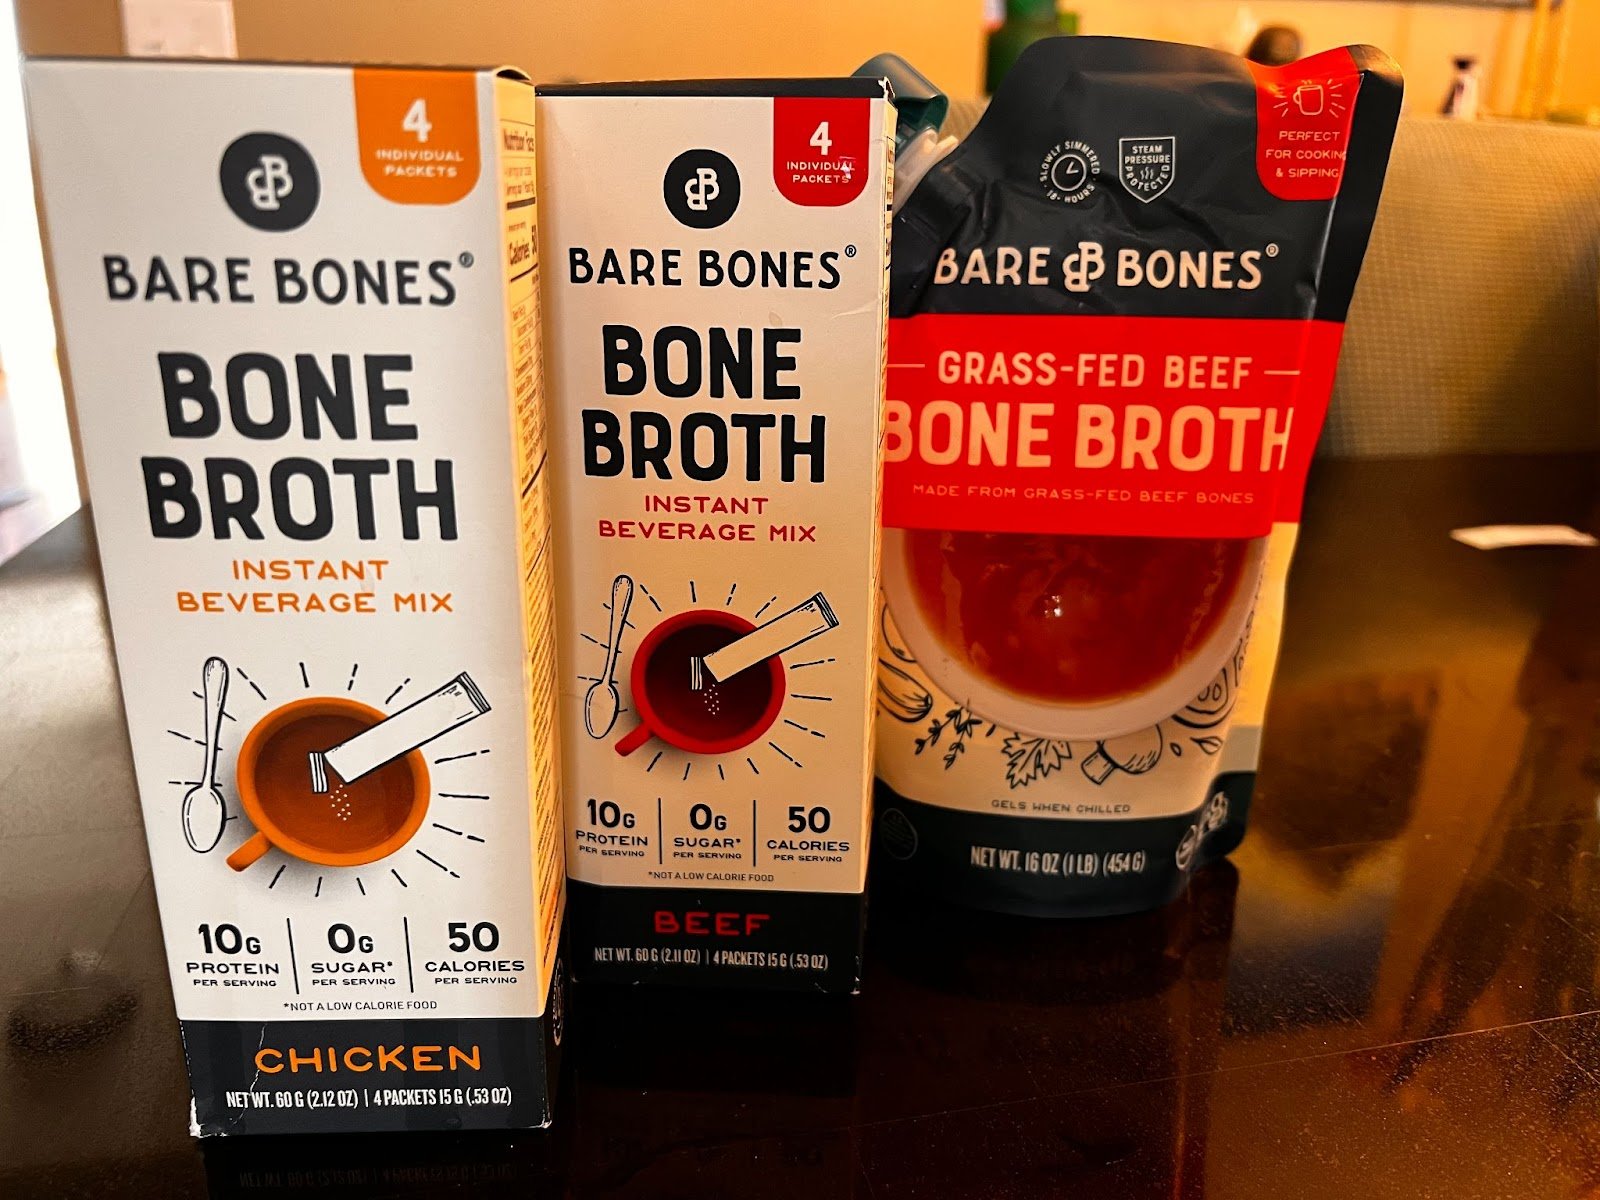 Classic Grass-Fed Beef Bone Broth, Instant Chicken, and Instant Beef